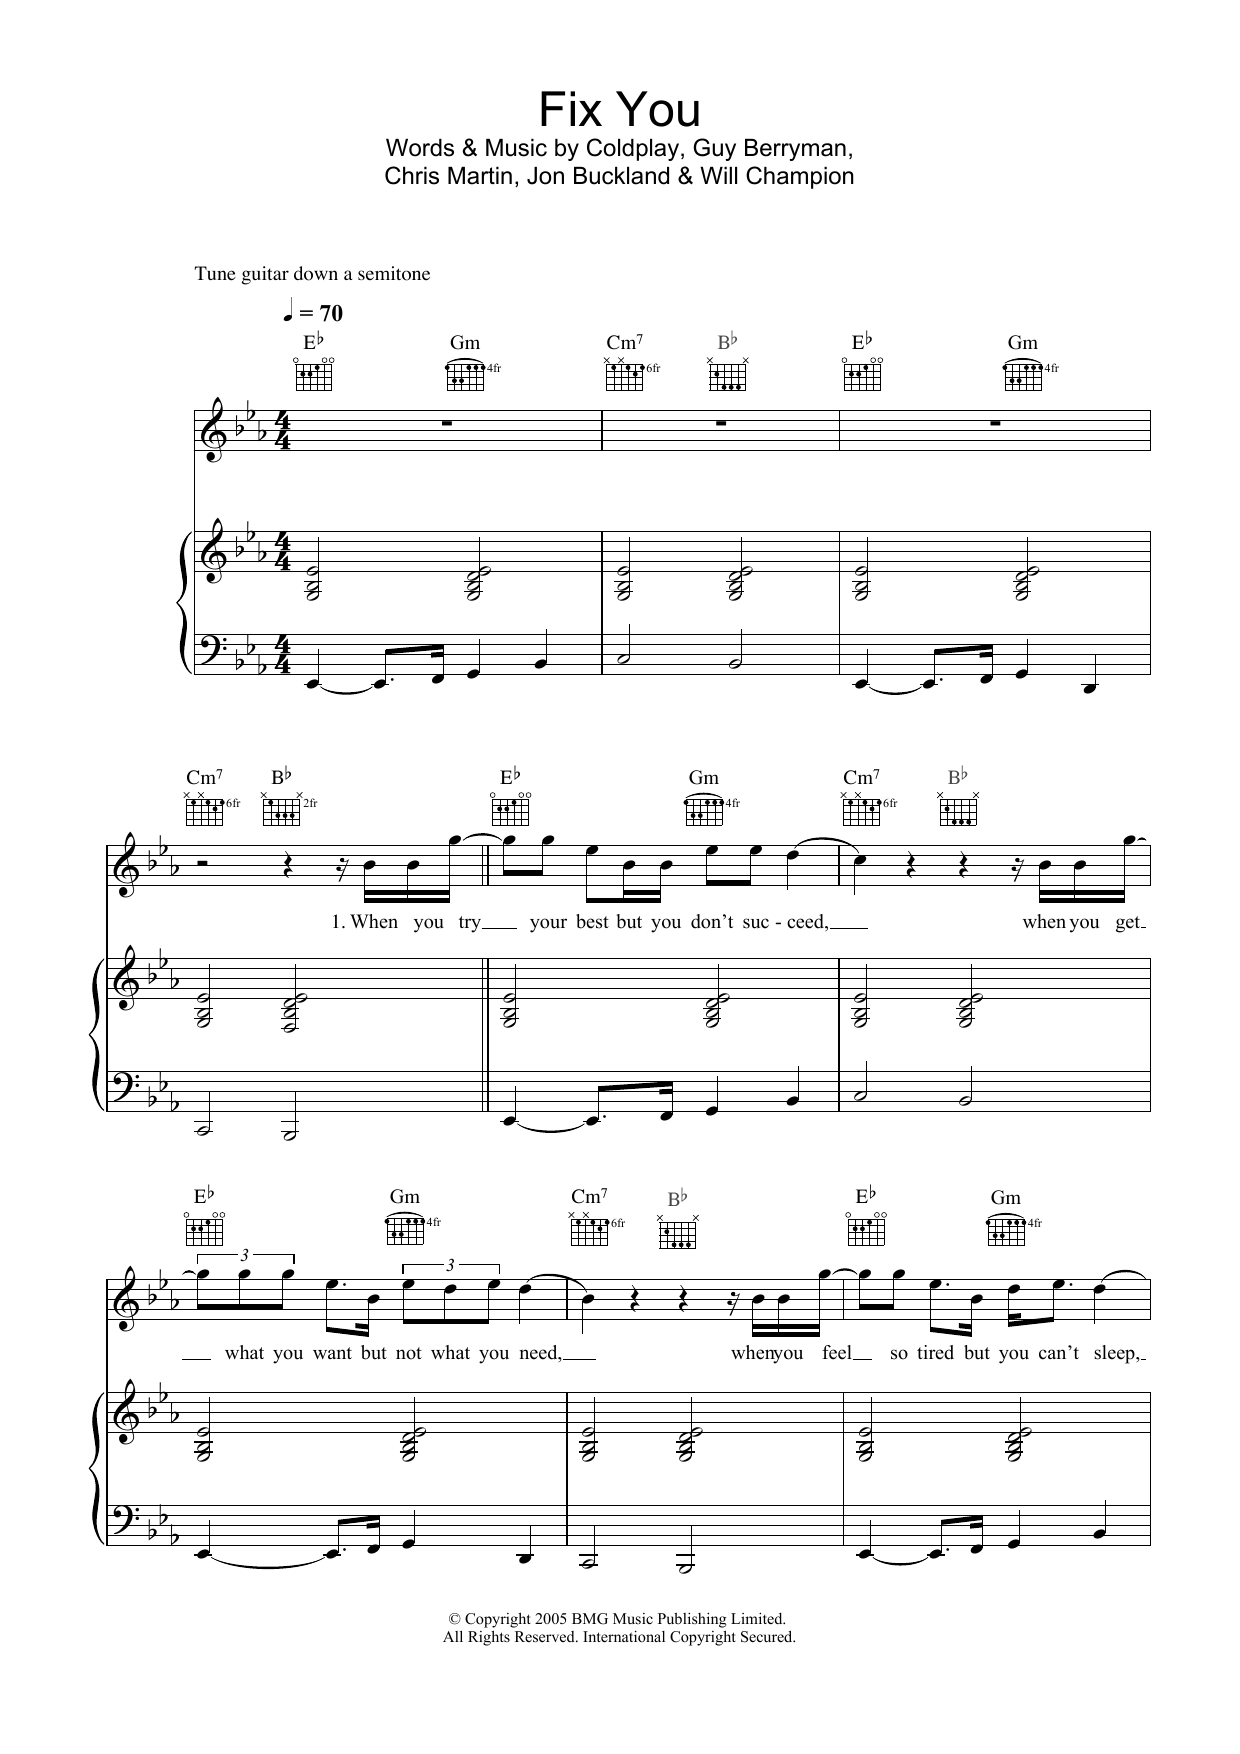 Coldplay Fix You sheet music notes and chords. Download Printable PDF.